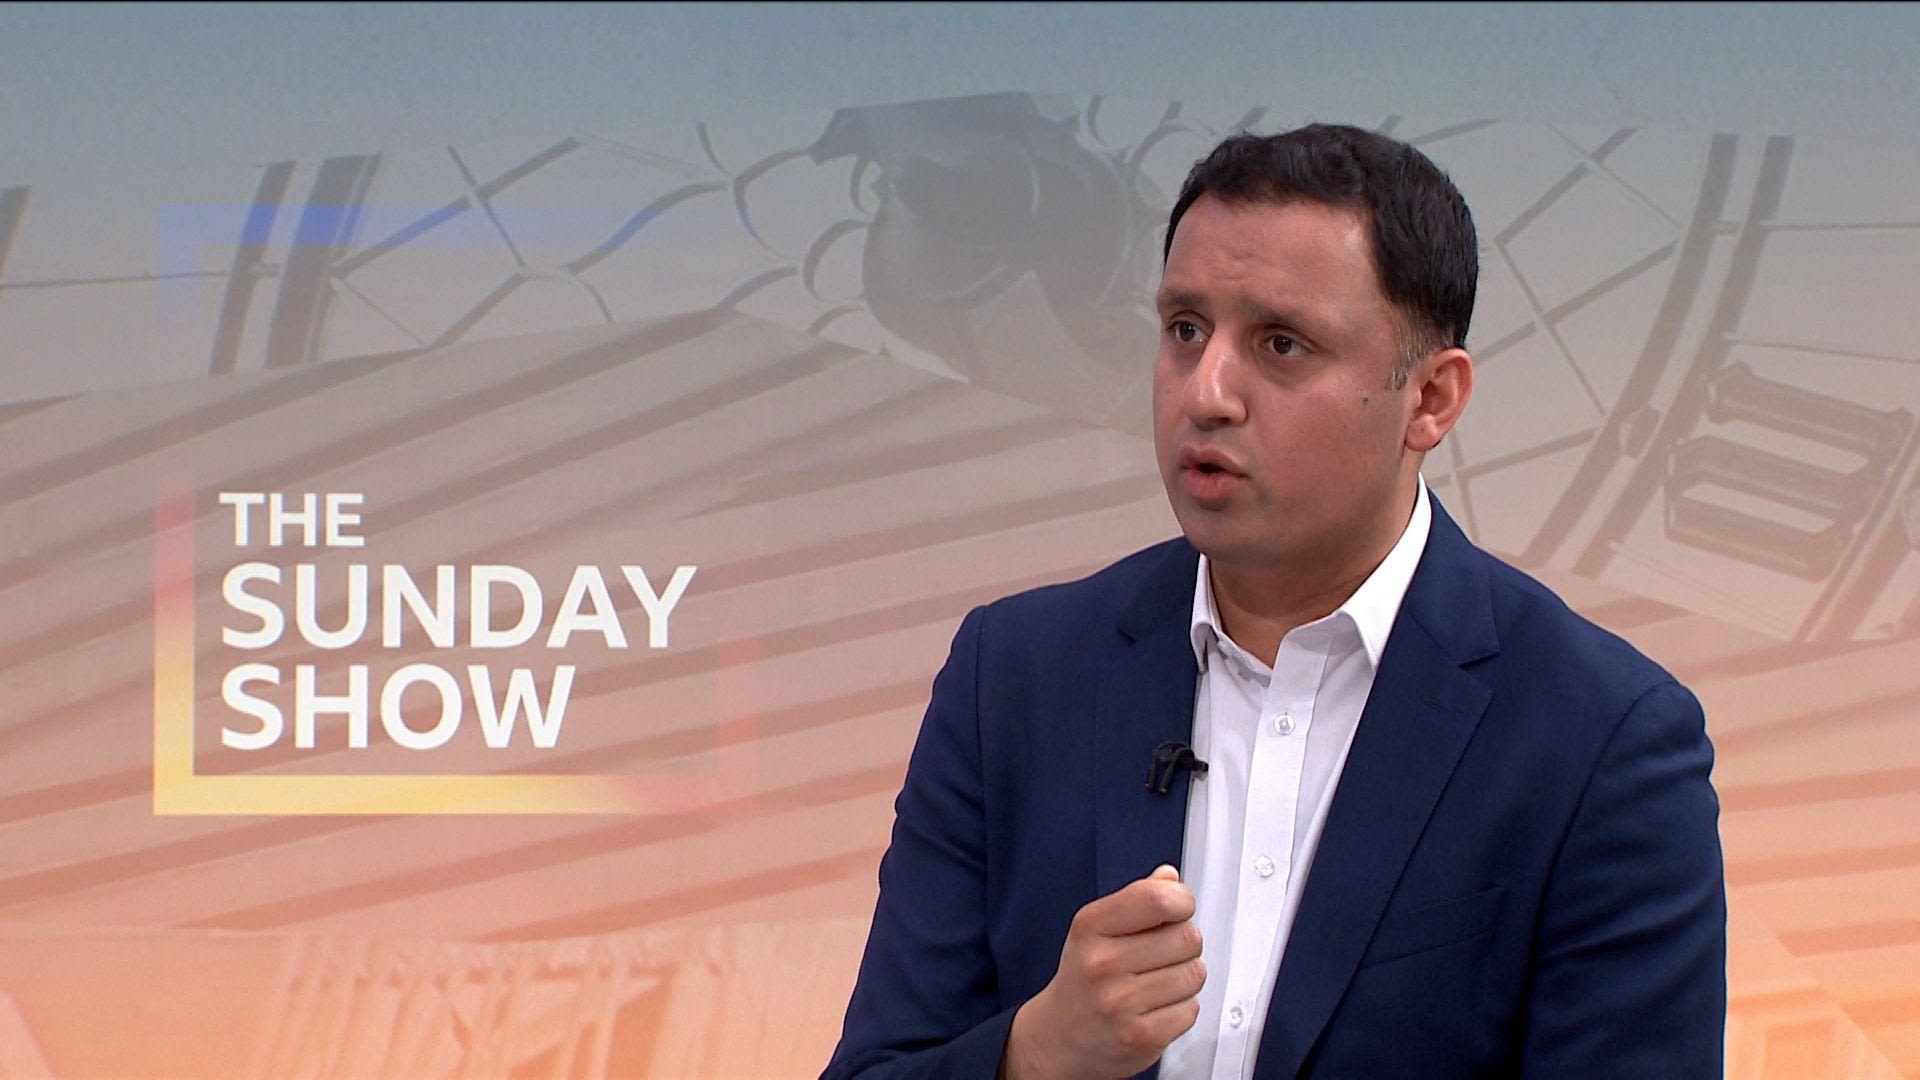 Sarwar accused of 'hypocrisy' over Labour living wage plan